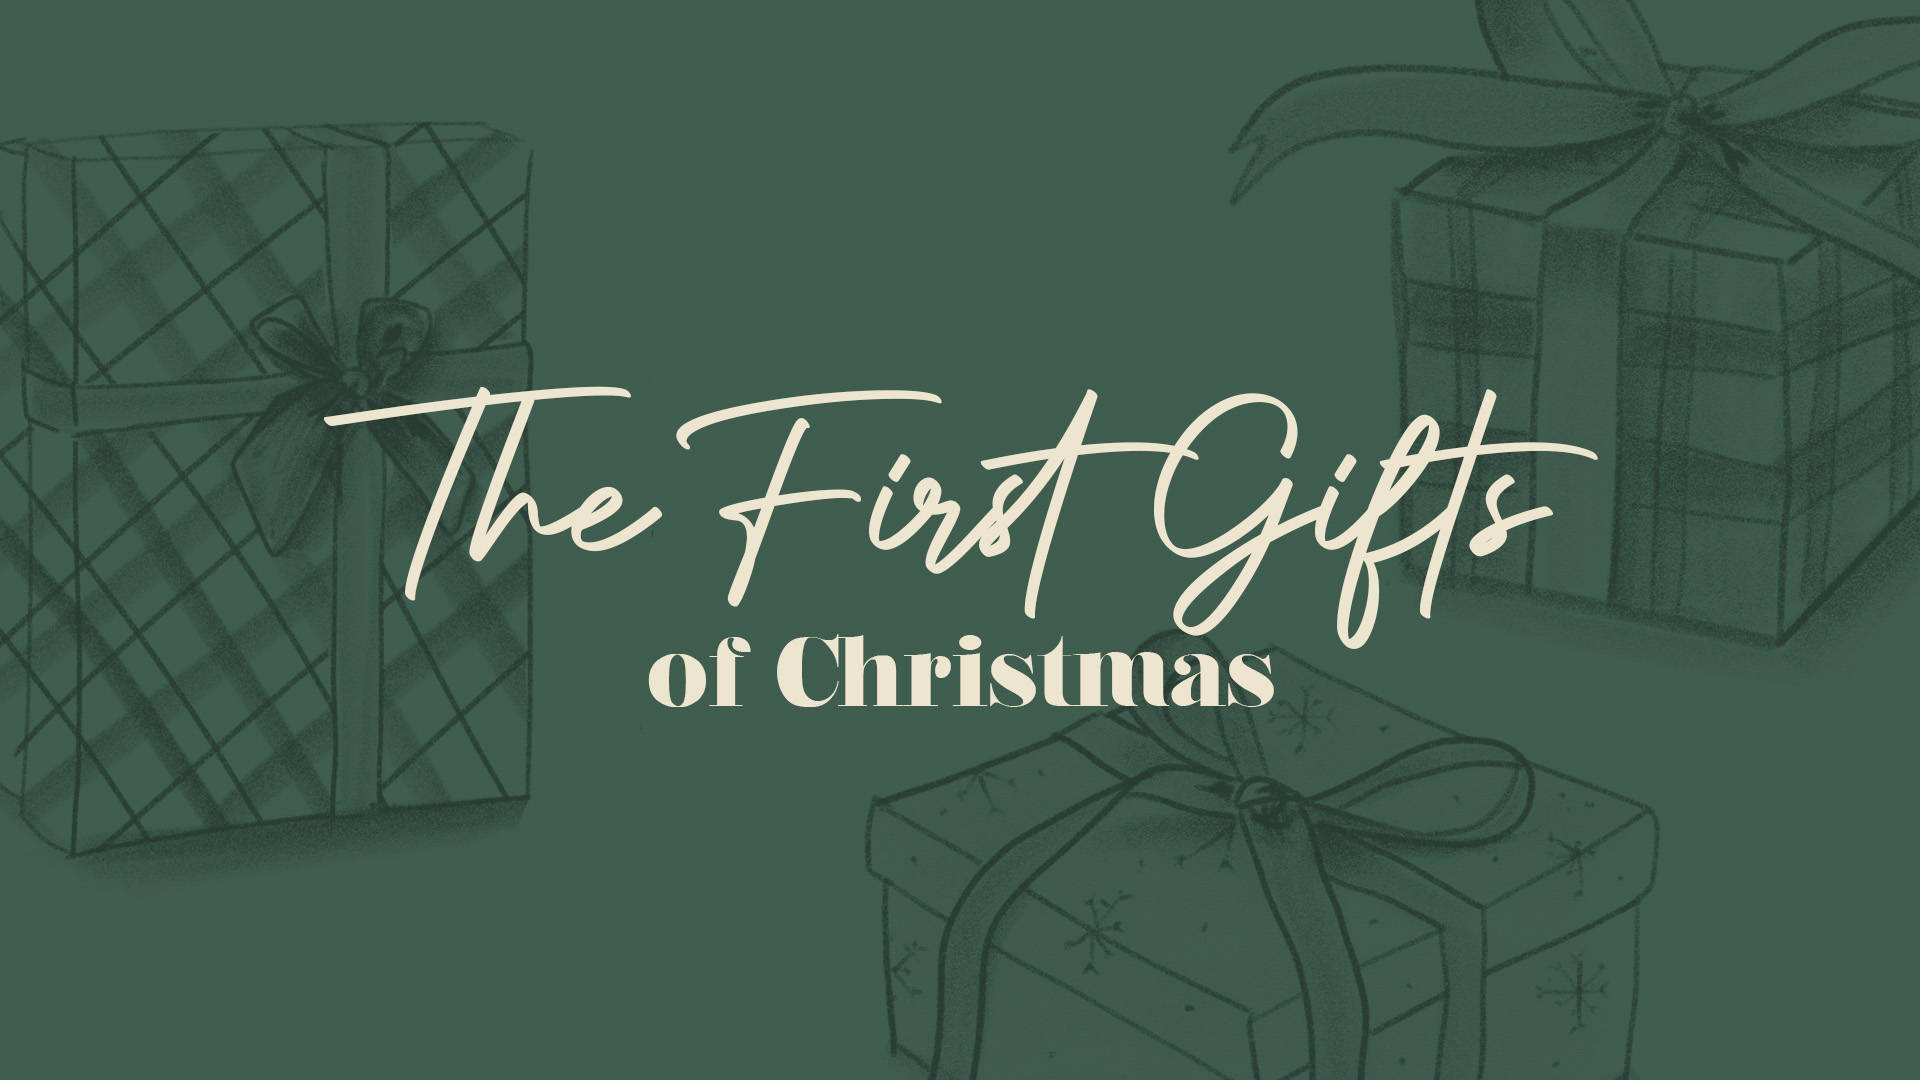 The First Gifts of Christmas